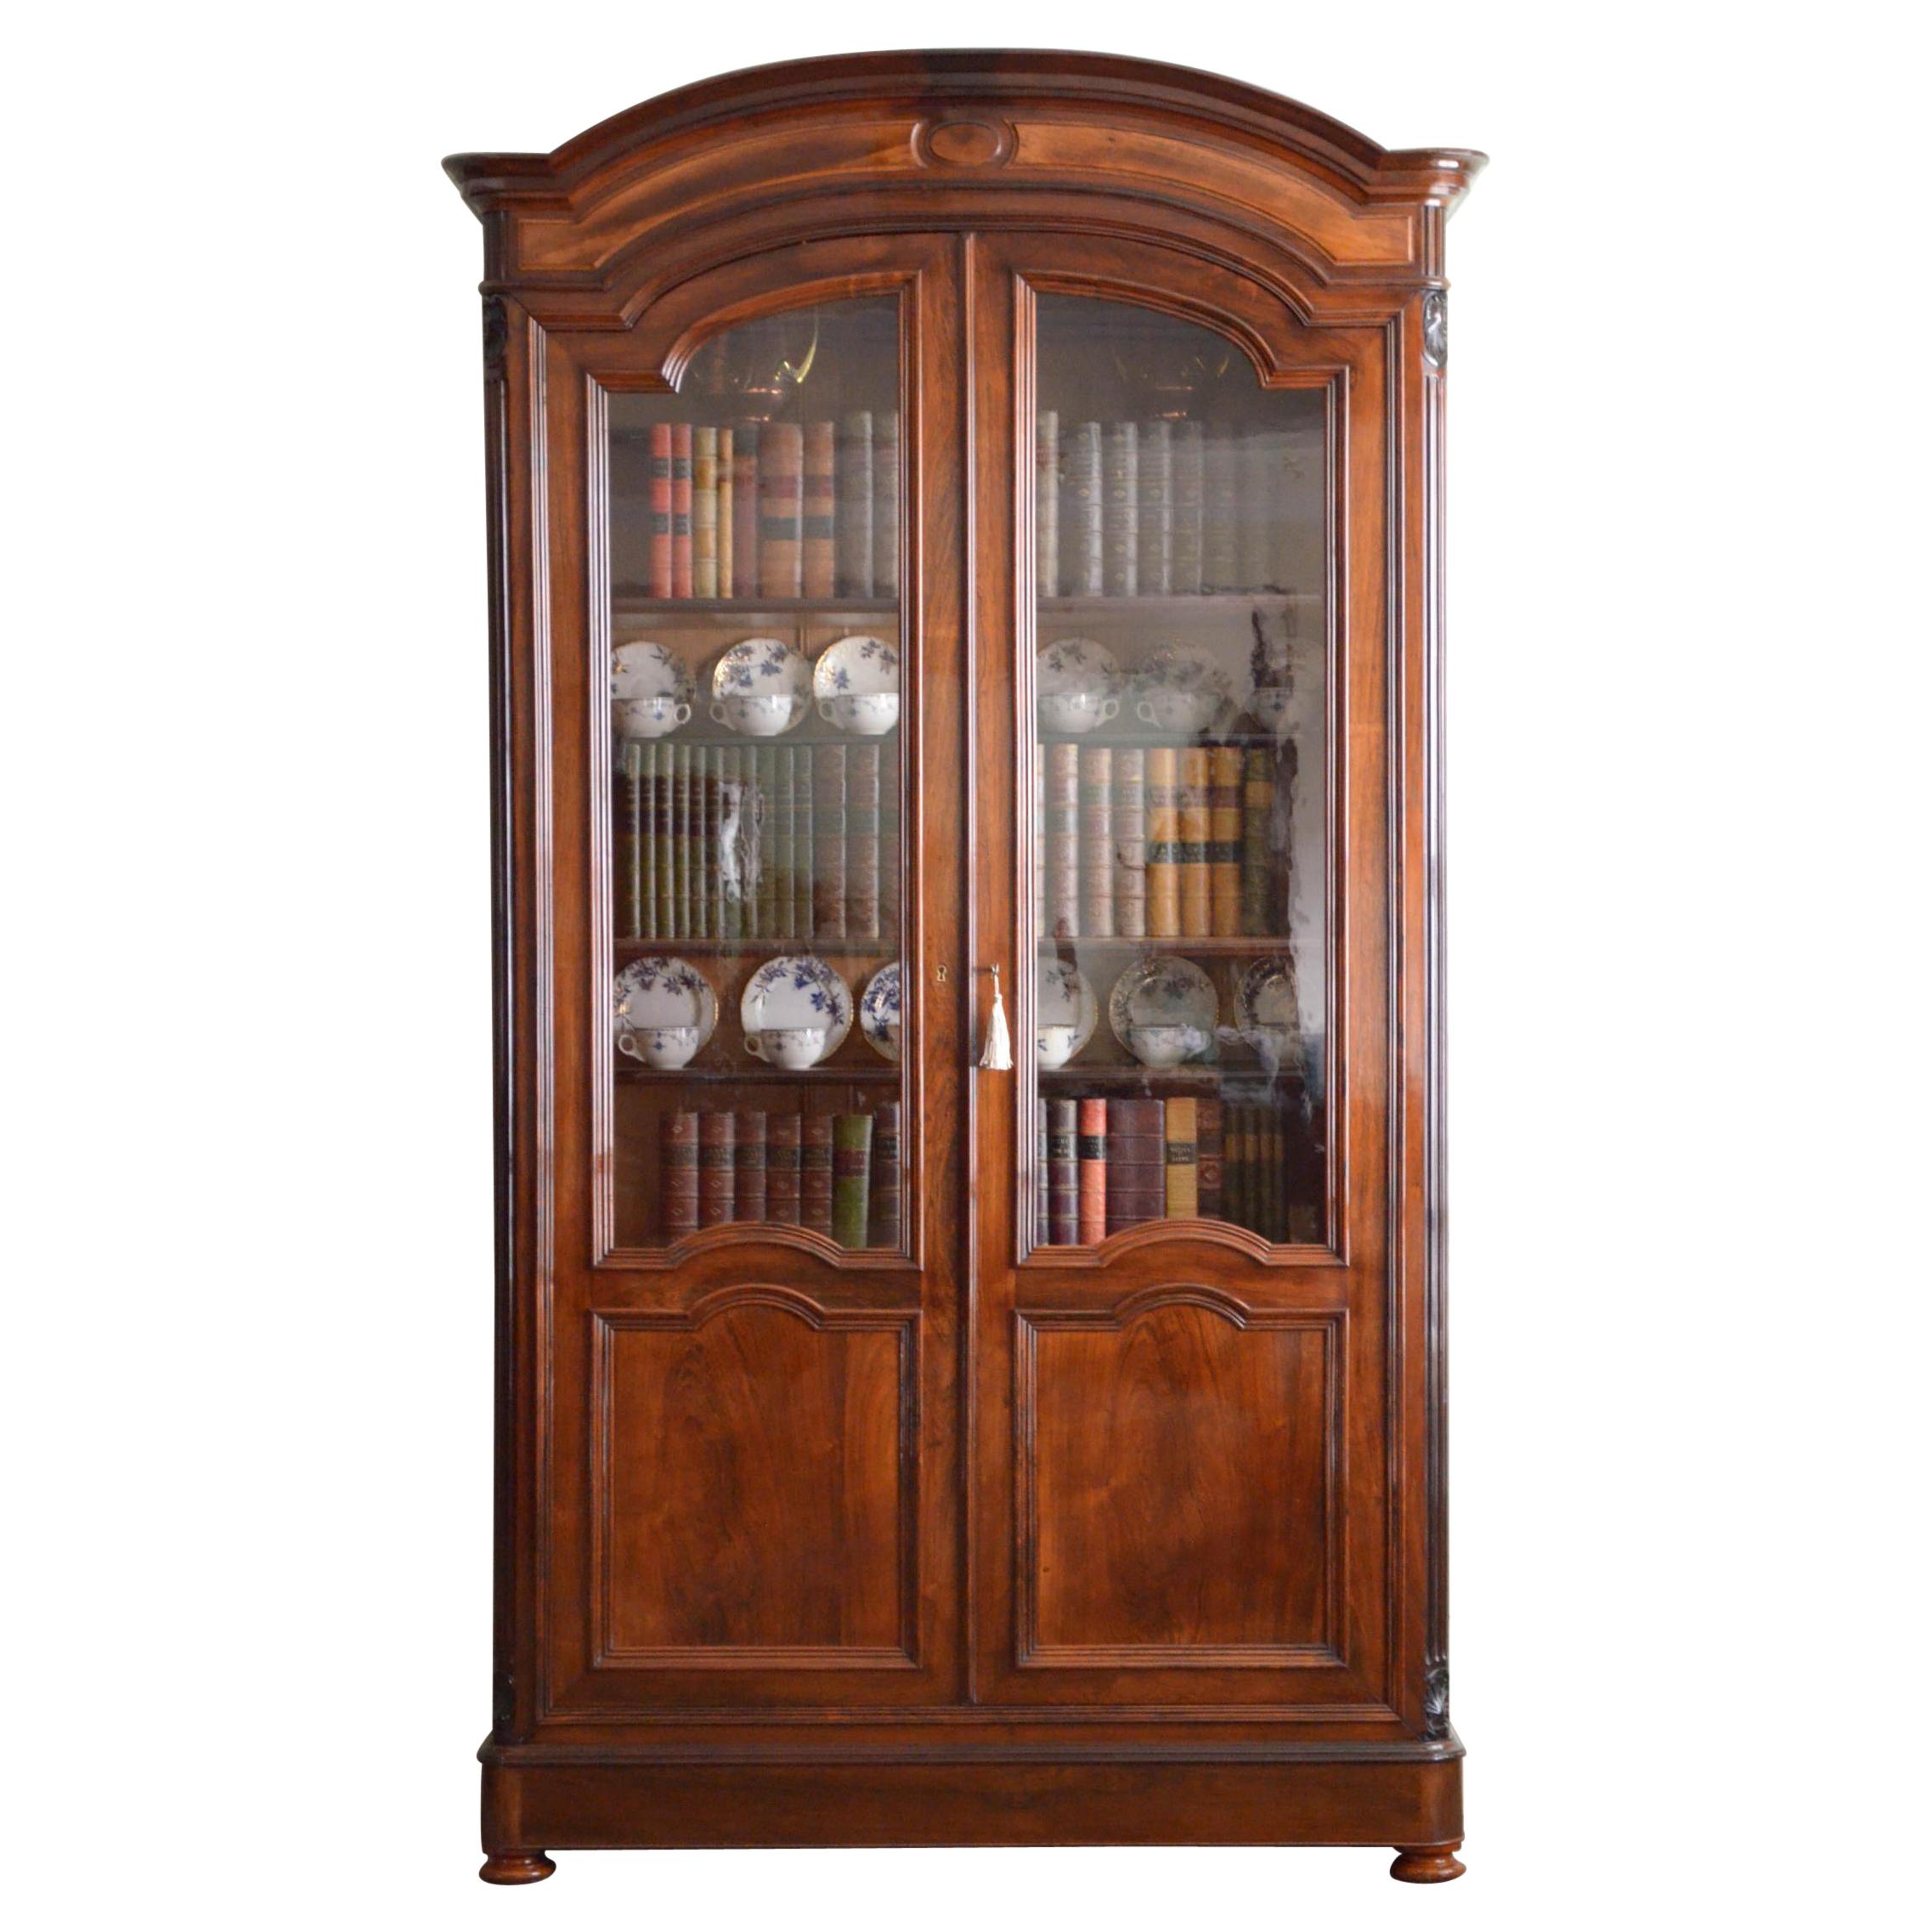 Superb XIXth Century Rosewood Bookcase or Display Cabinet